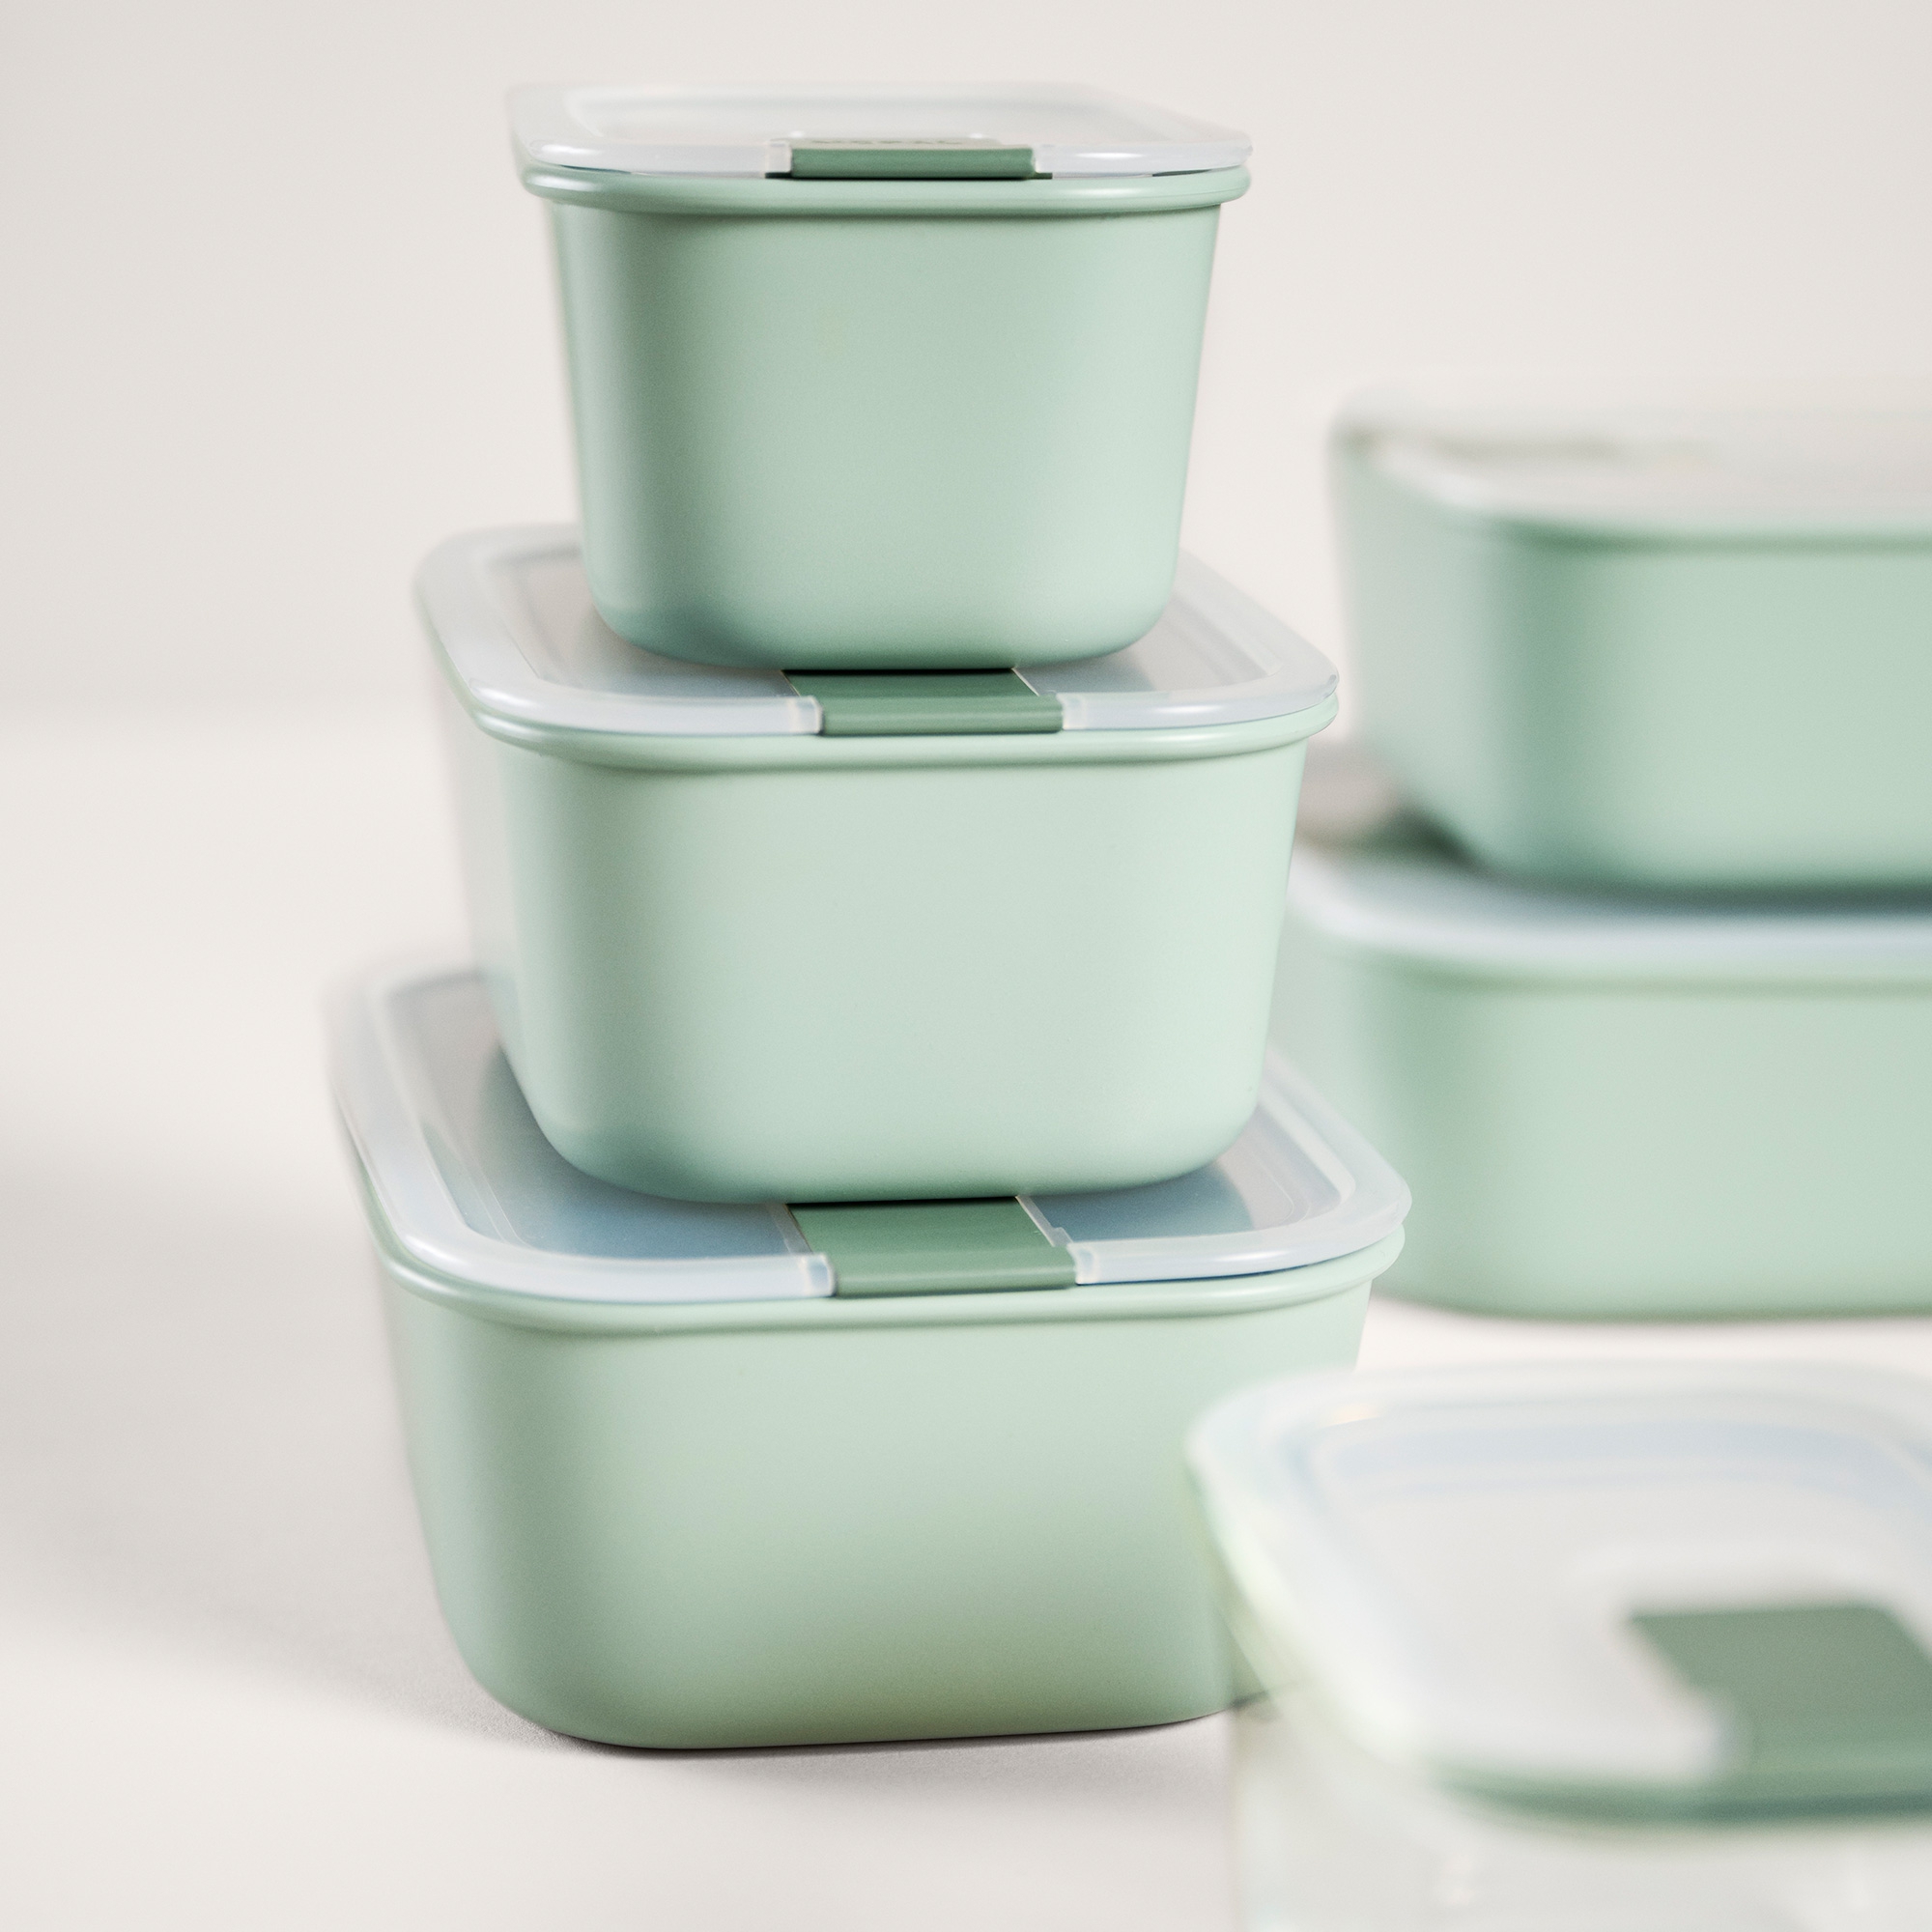 Mepal - Easyclip food storage box - different sizes and colors